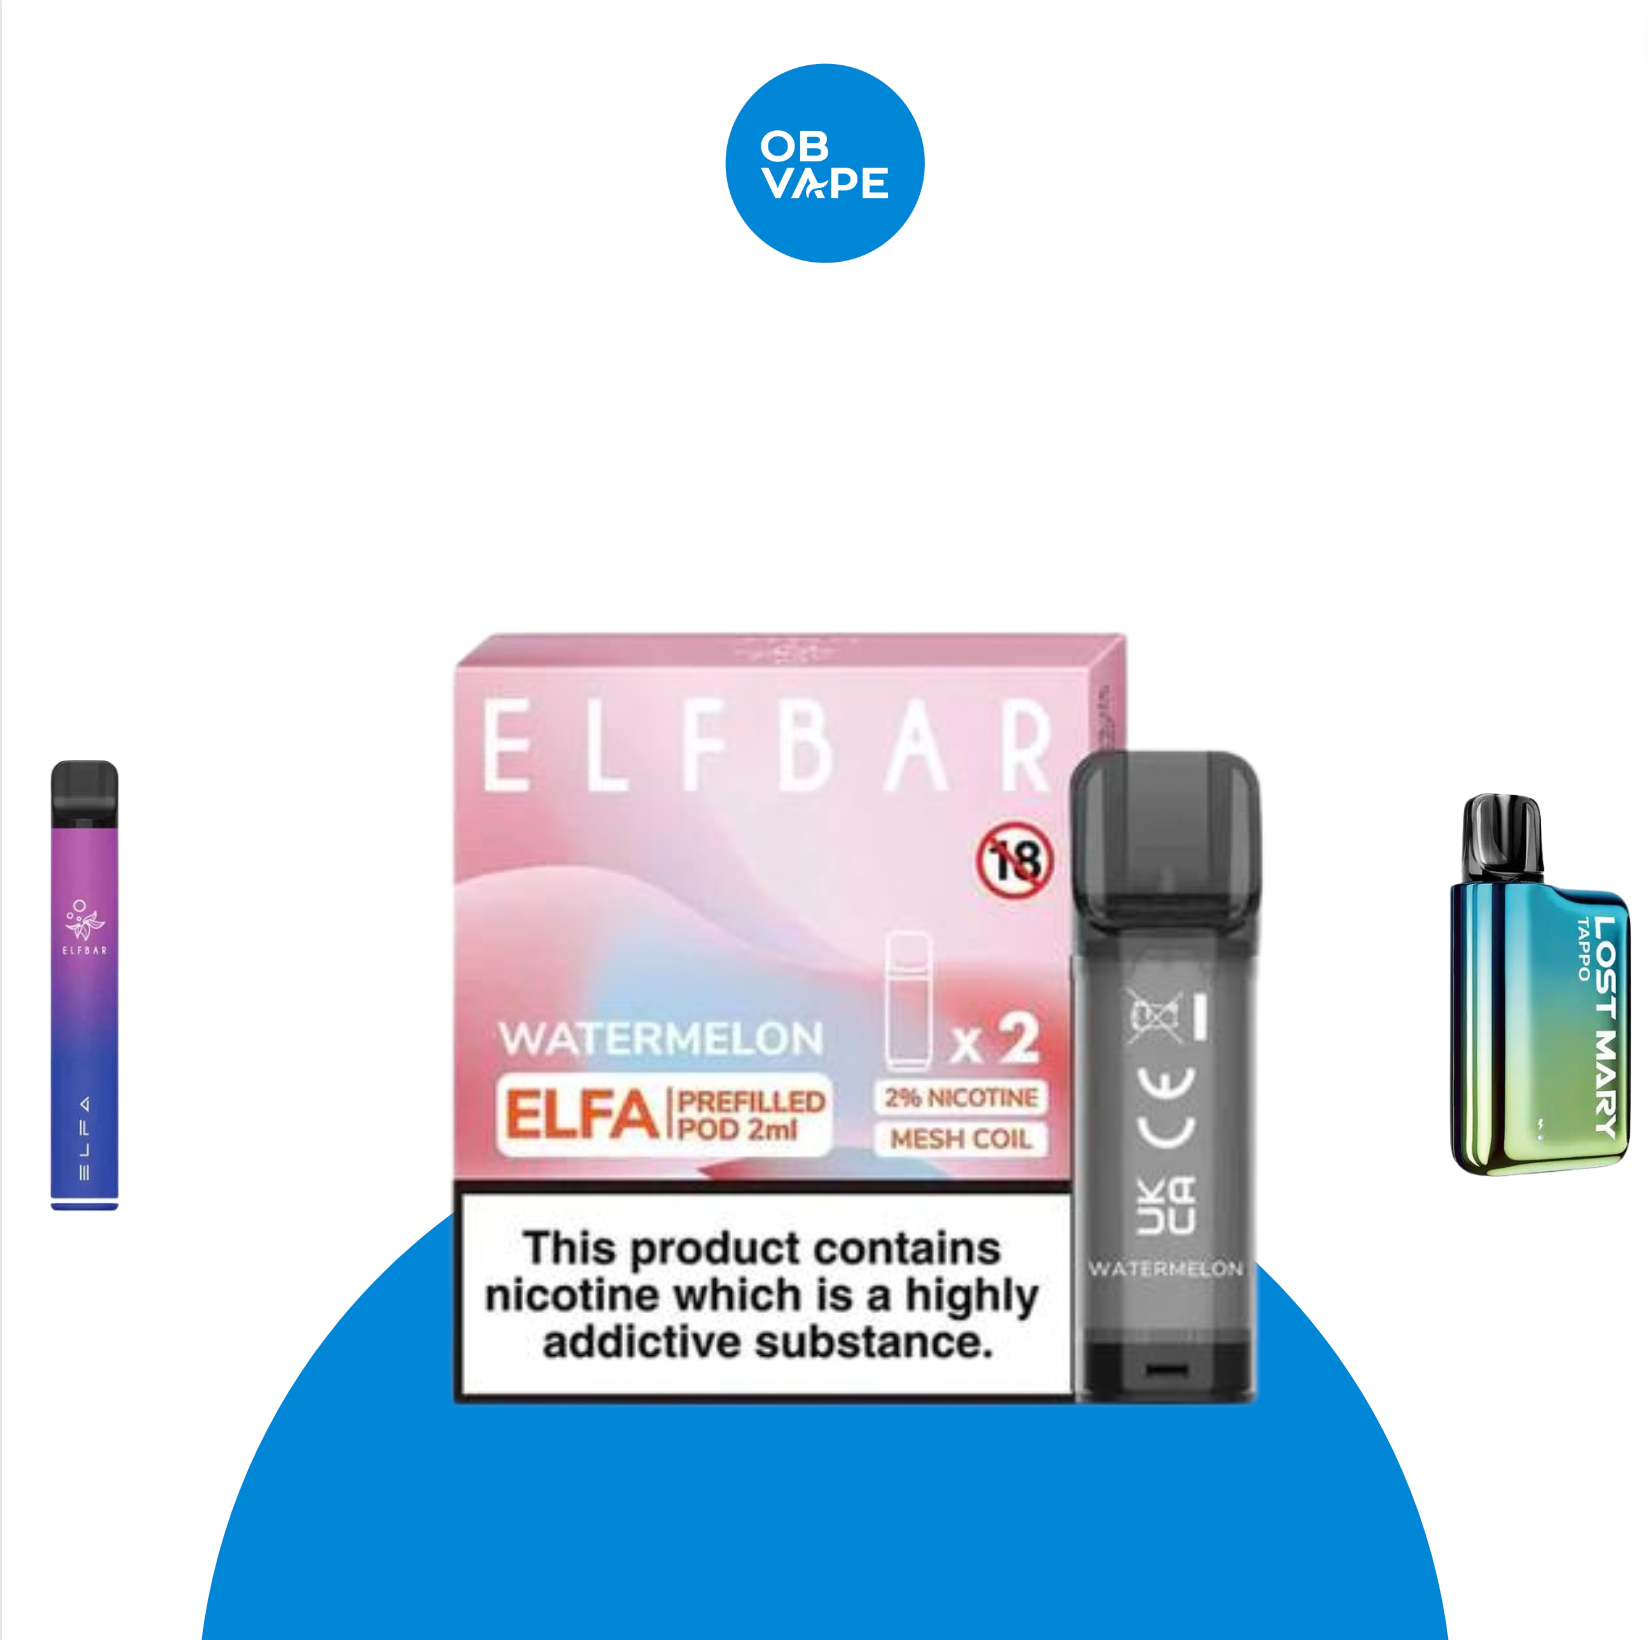 Elf Bar - Elfa / Lost Mary Tappo Prefilled Pods (2-Pack) - OB Vape Shop Ireland | Free Next Day Delivery Over €50 | OB Vape Ireland's Premier Vape Shop | IVG 2400, Lost Mary, Elfliq, Disposable Vape